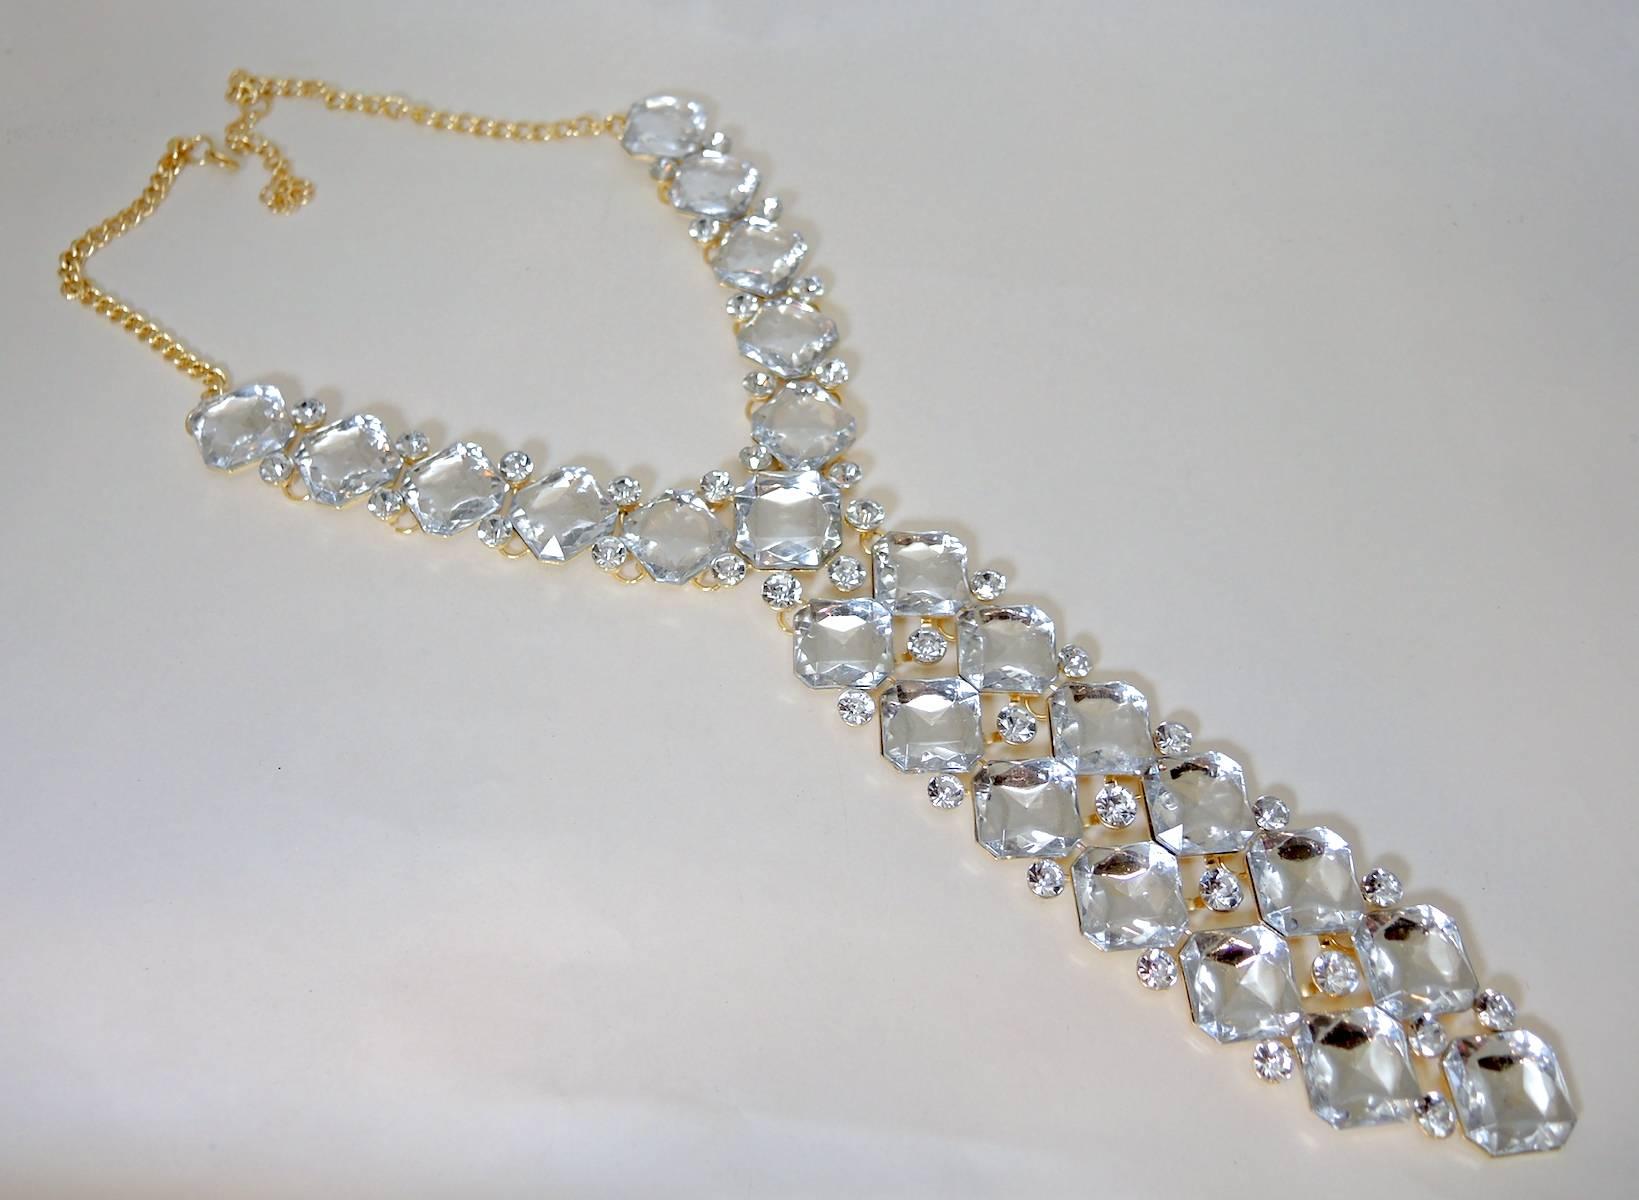 This is a glitzy, fashionable waterfall necklace that has abundance of large rectangular and smaller clear resin like crystals. It is made in a gold tone setting and measures 23” x 1/4”. The centerpiece measures 8” x 2”. It has a lobster clasp and